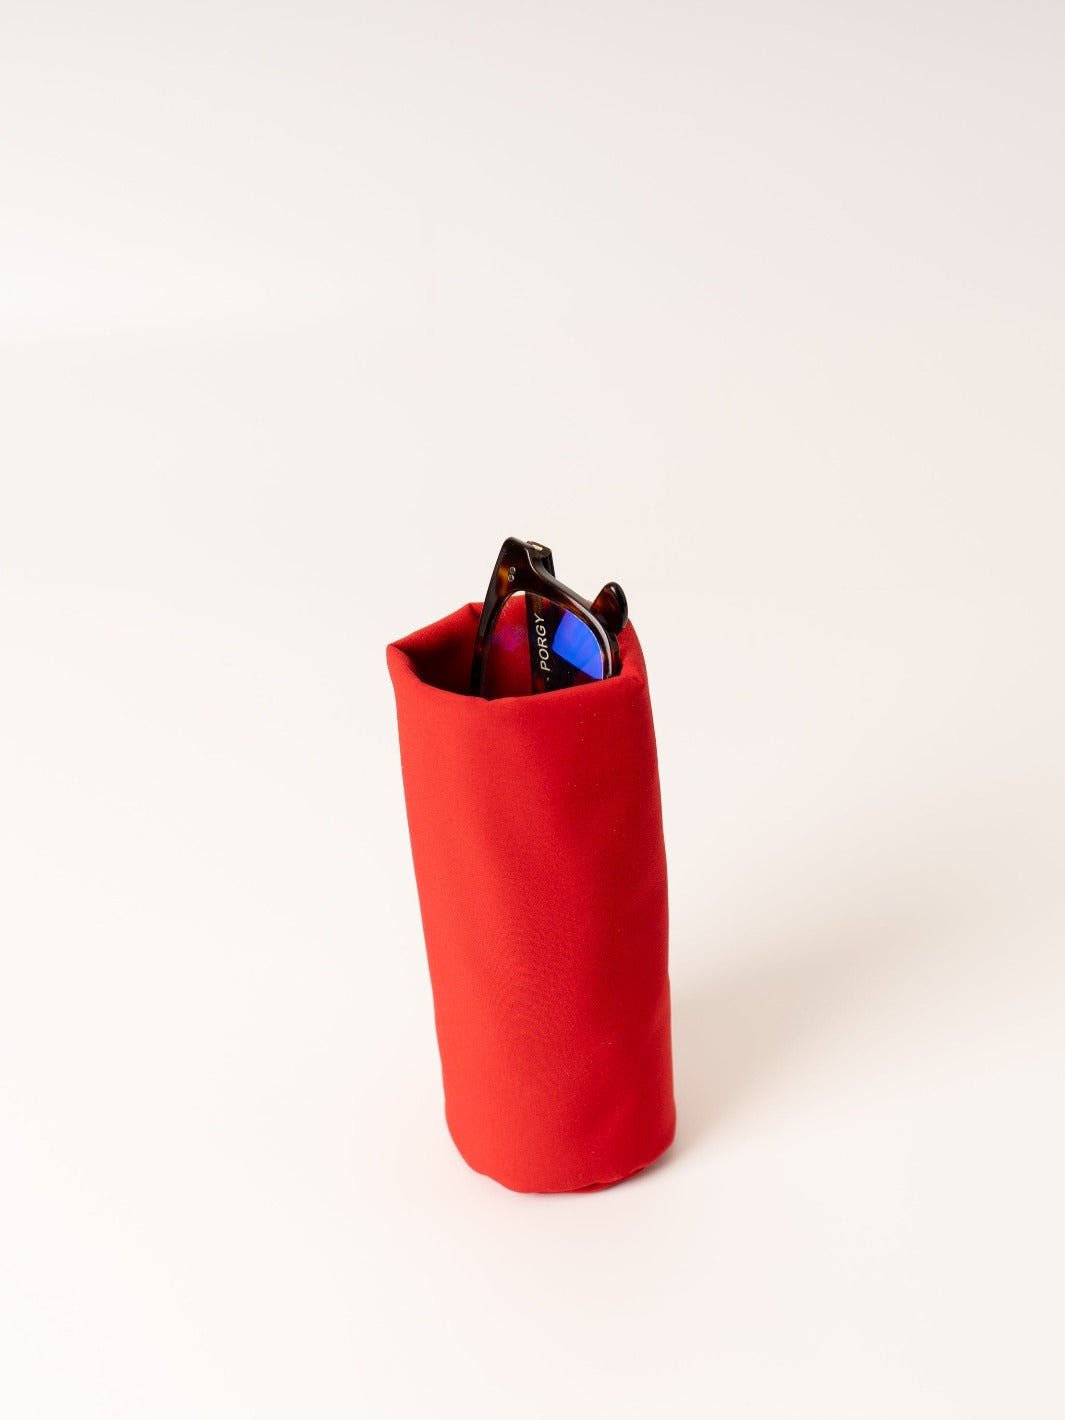 Red Sacco Glasses Holder and Storage Pouch - Heyday